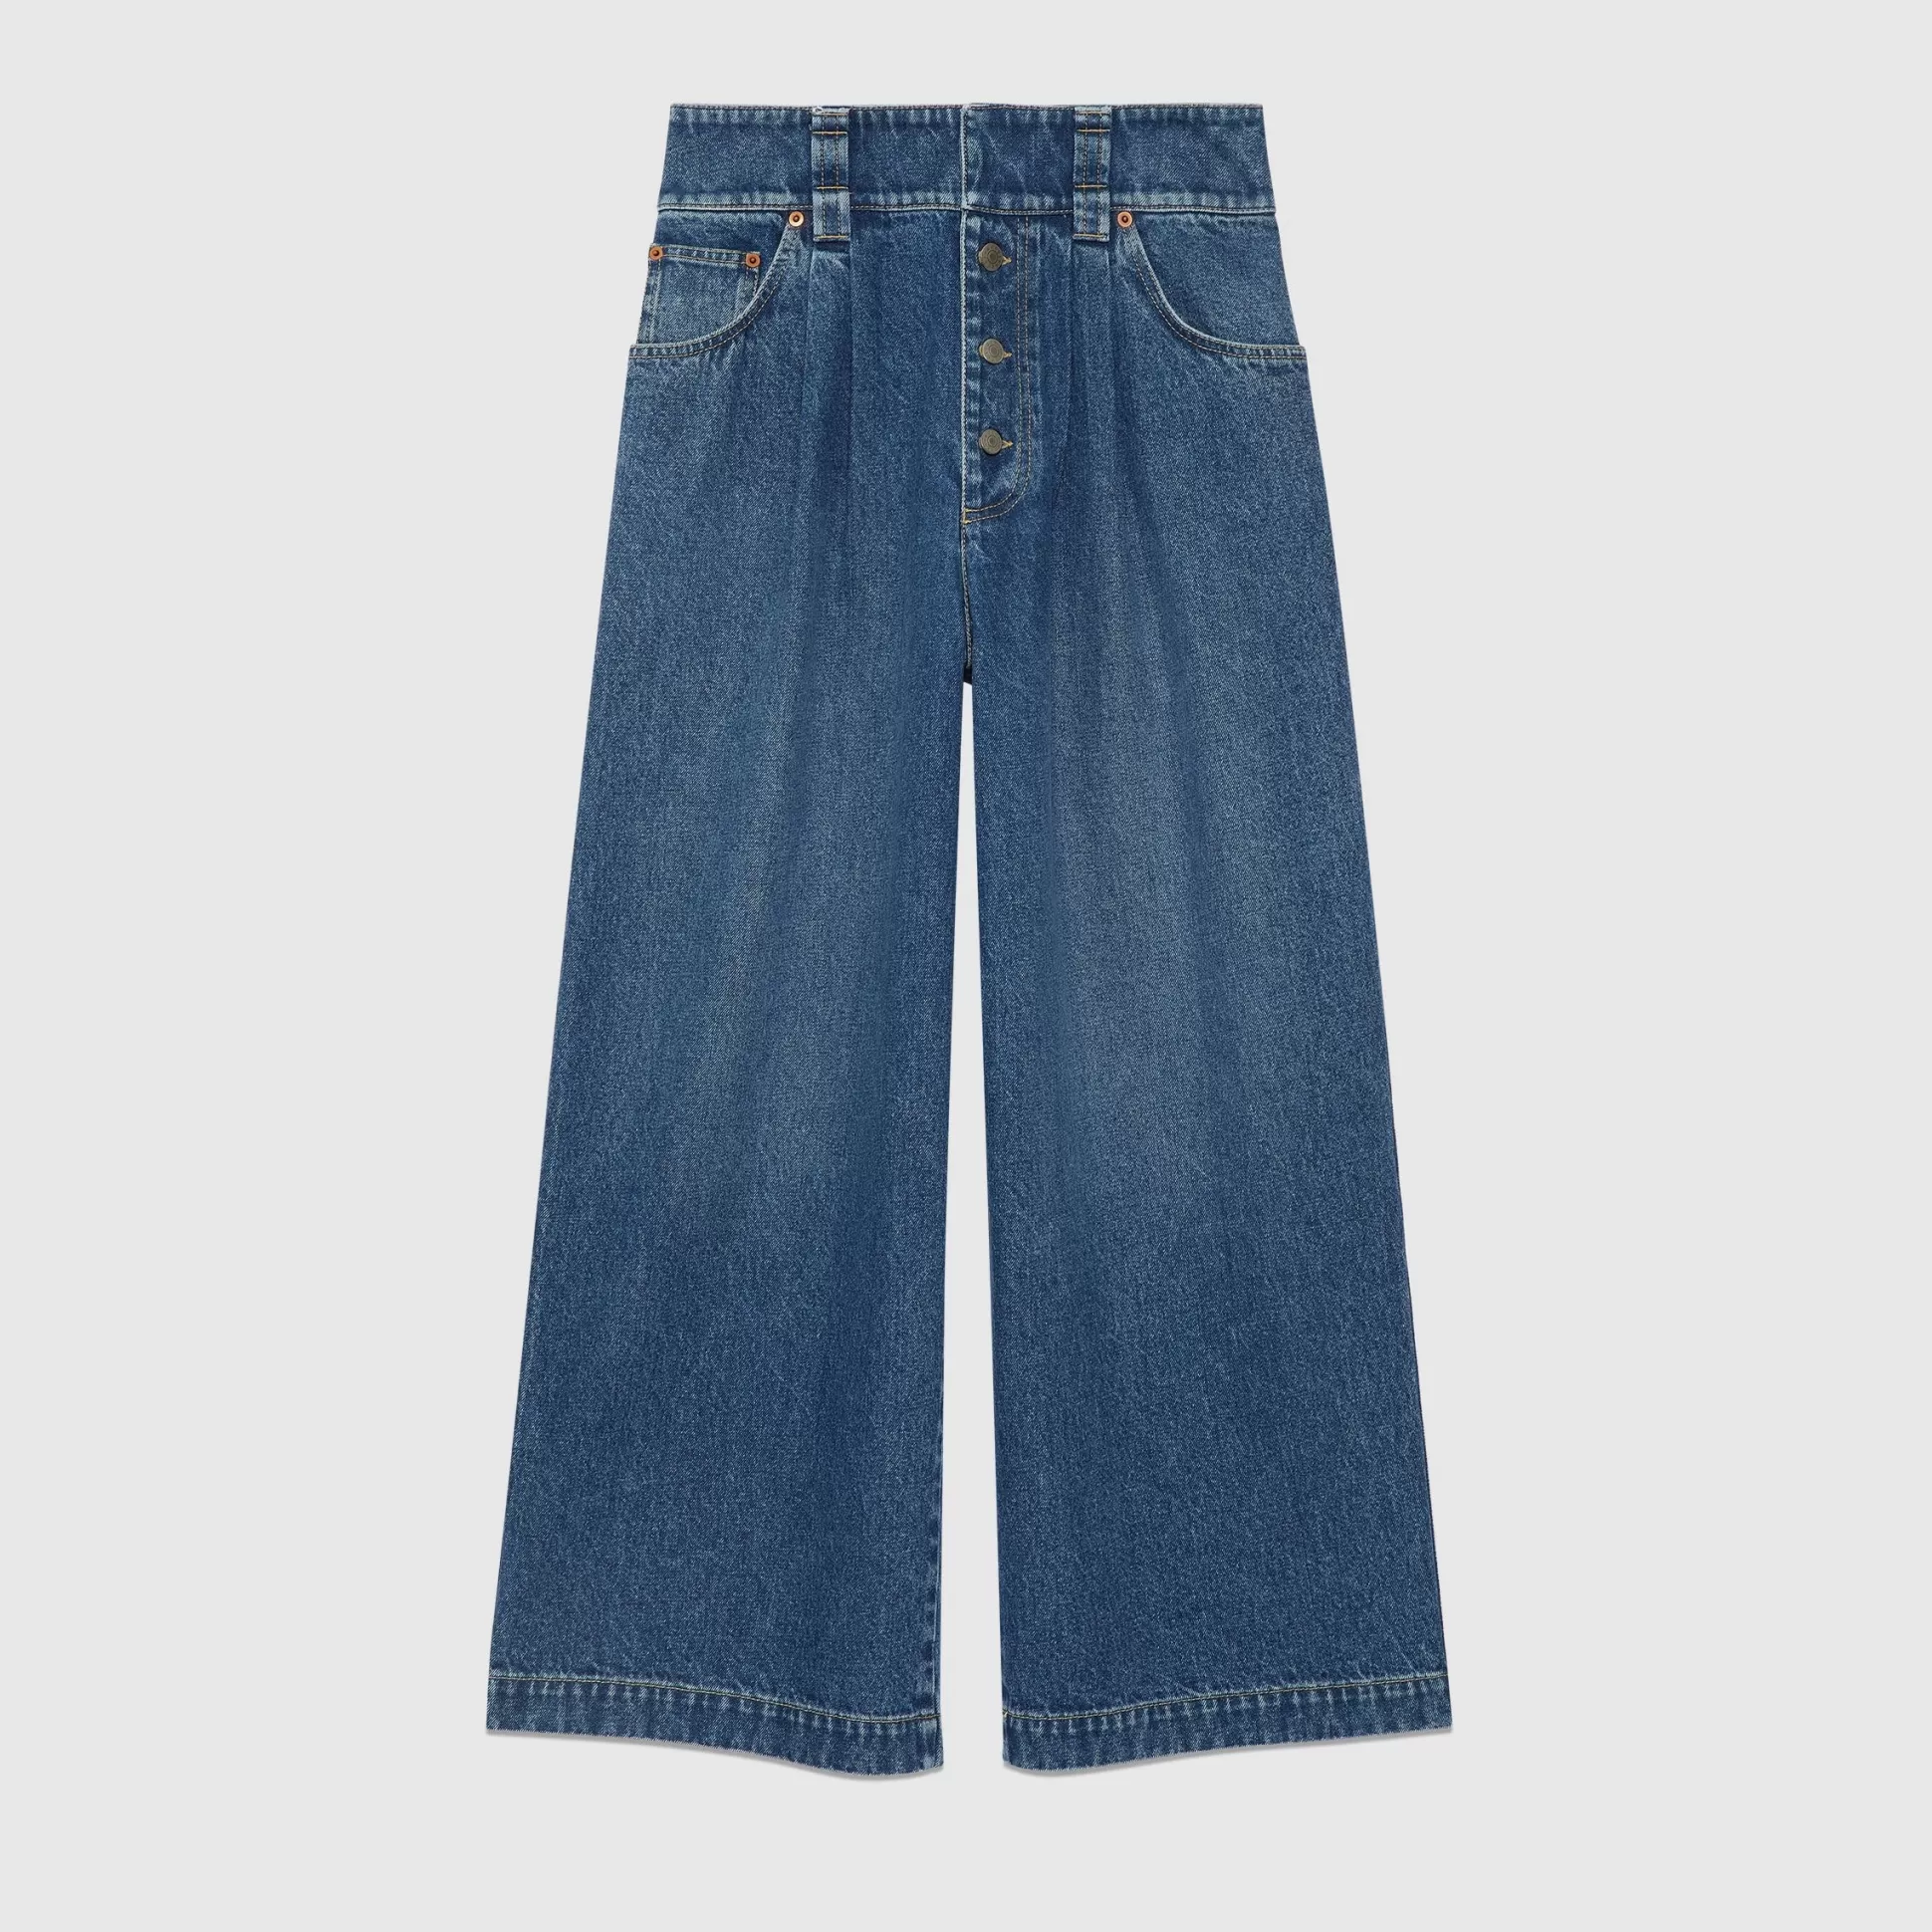 GUCCI Denim Pant With Label-Women Winter Ready-To-Wear